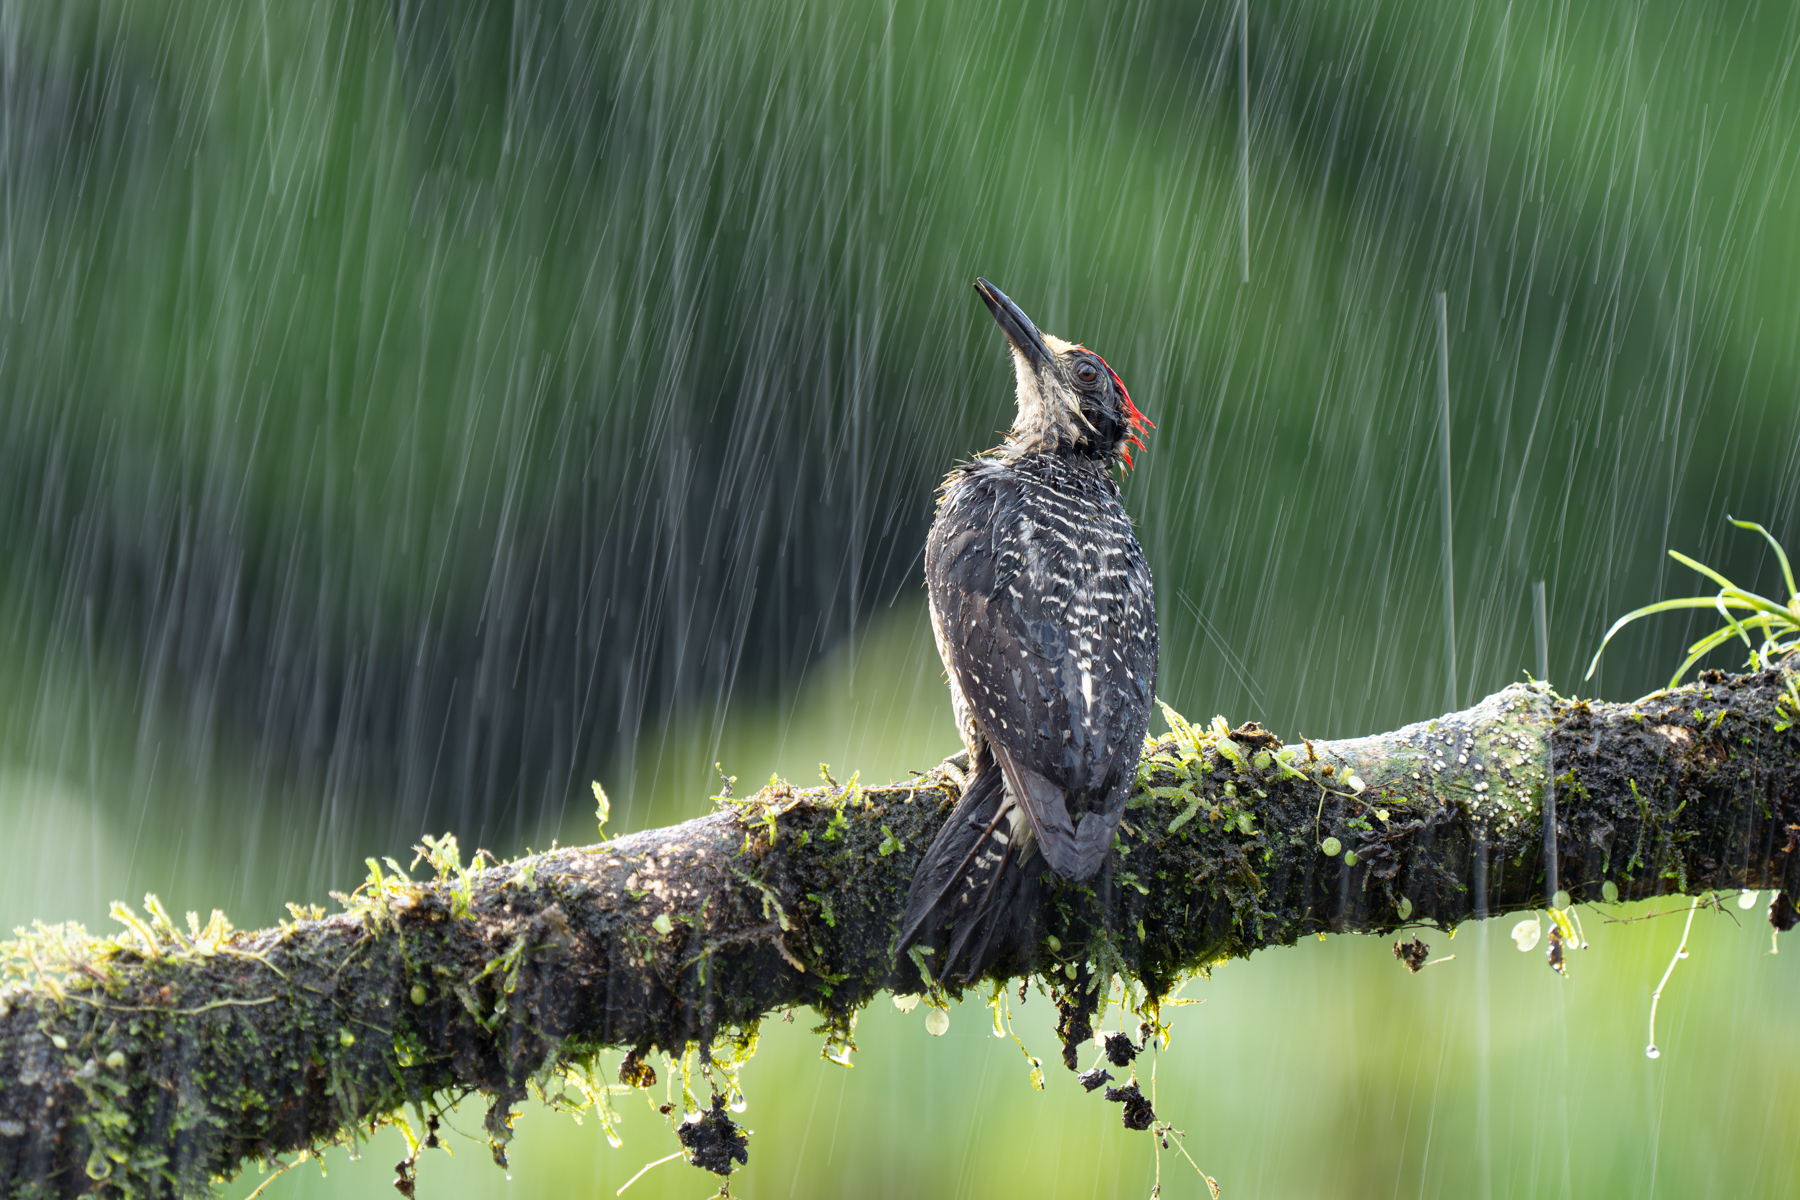 Playing in the rain. Doing a long exposure of creatures in the rain relies on having a very cooperative creature like this Black-cheeked Woodpecker who relished the sudden downpour to cool off (image by Inger Vandyke)